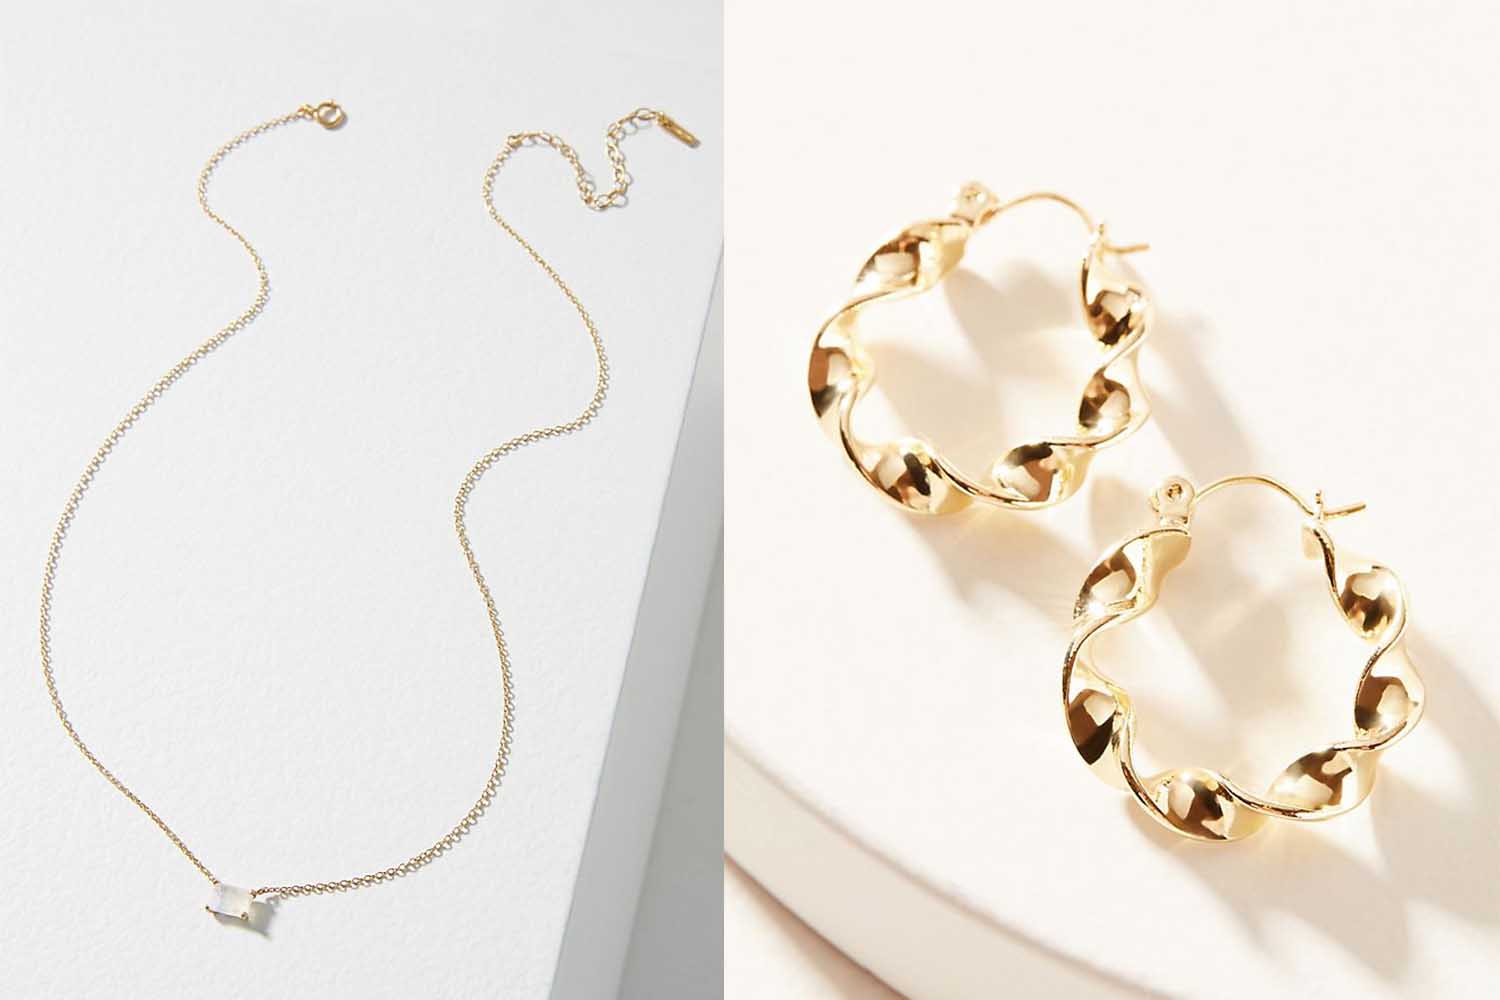 Deal: All Jewelry at Anthropologie Is 30% Off